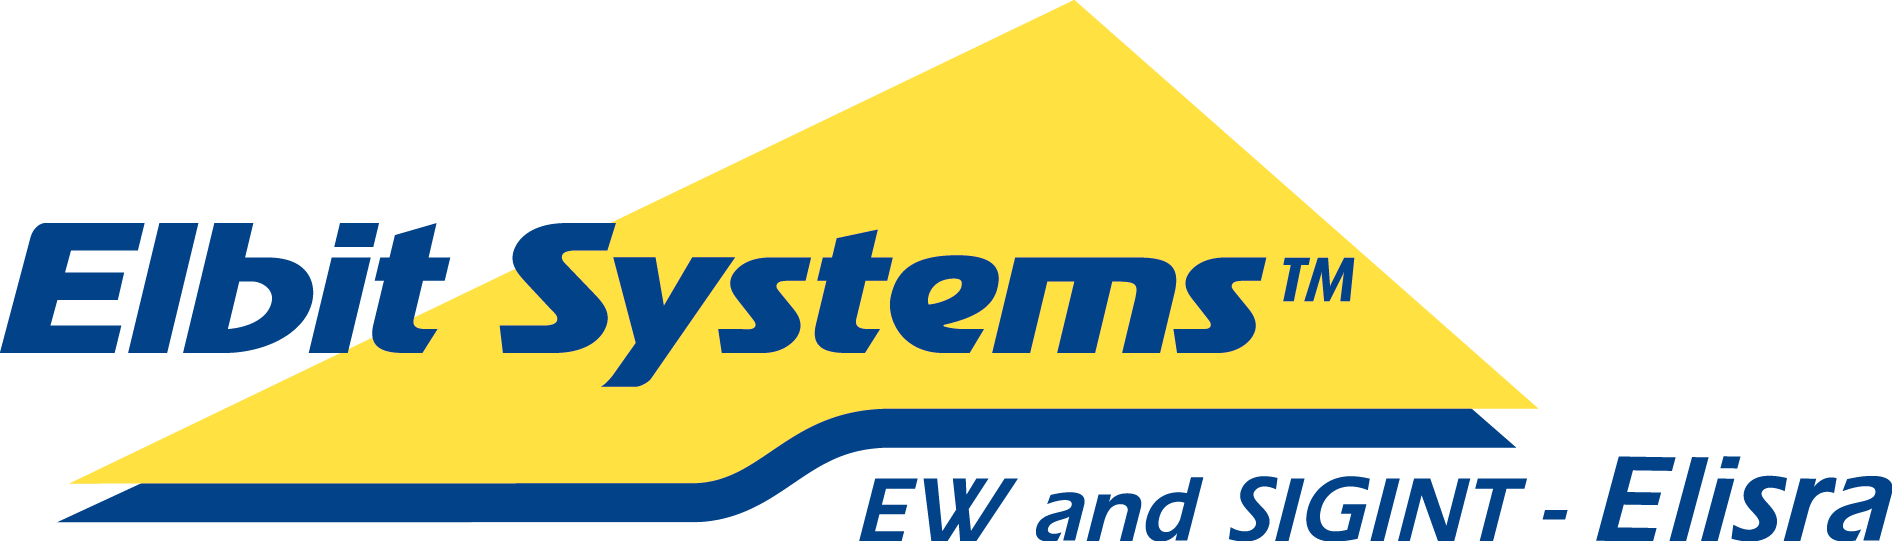 Elbit Systems EW and SIGINT